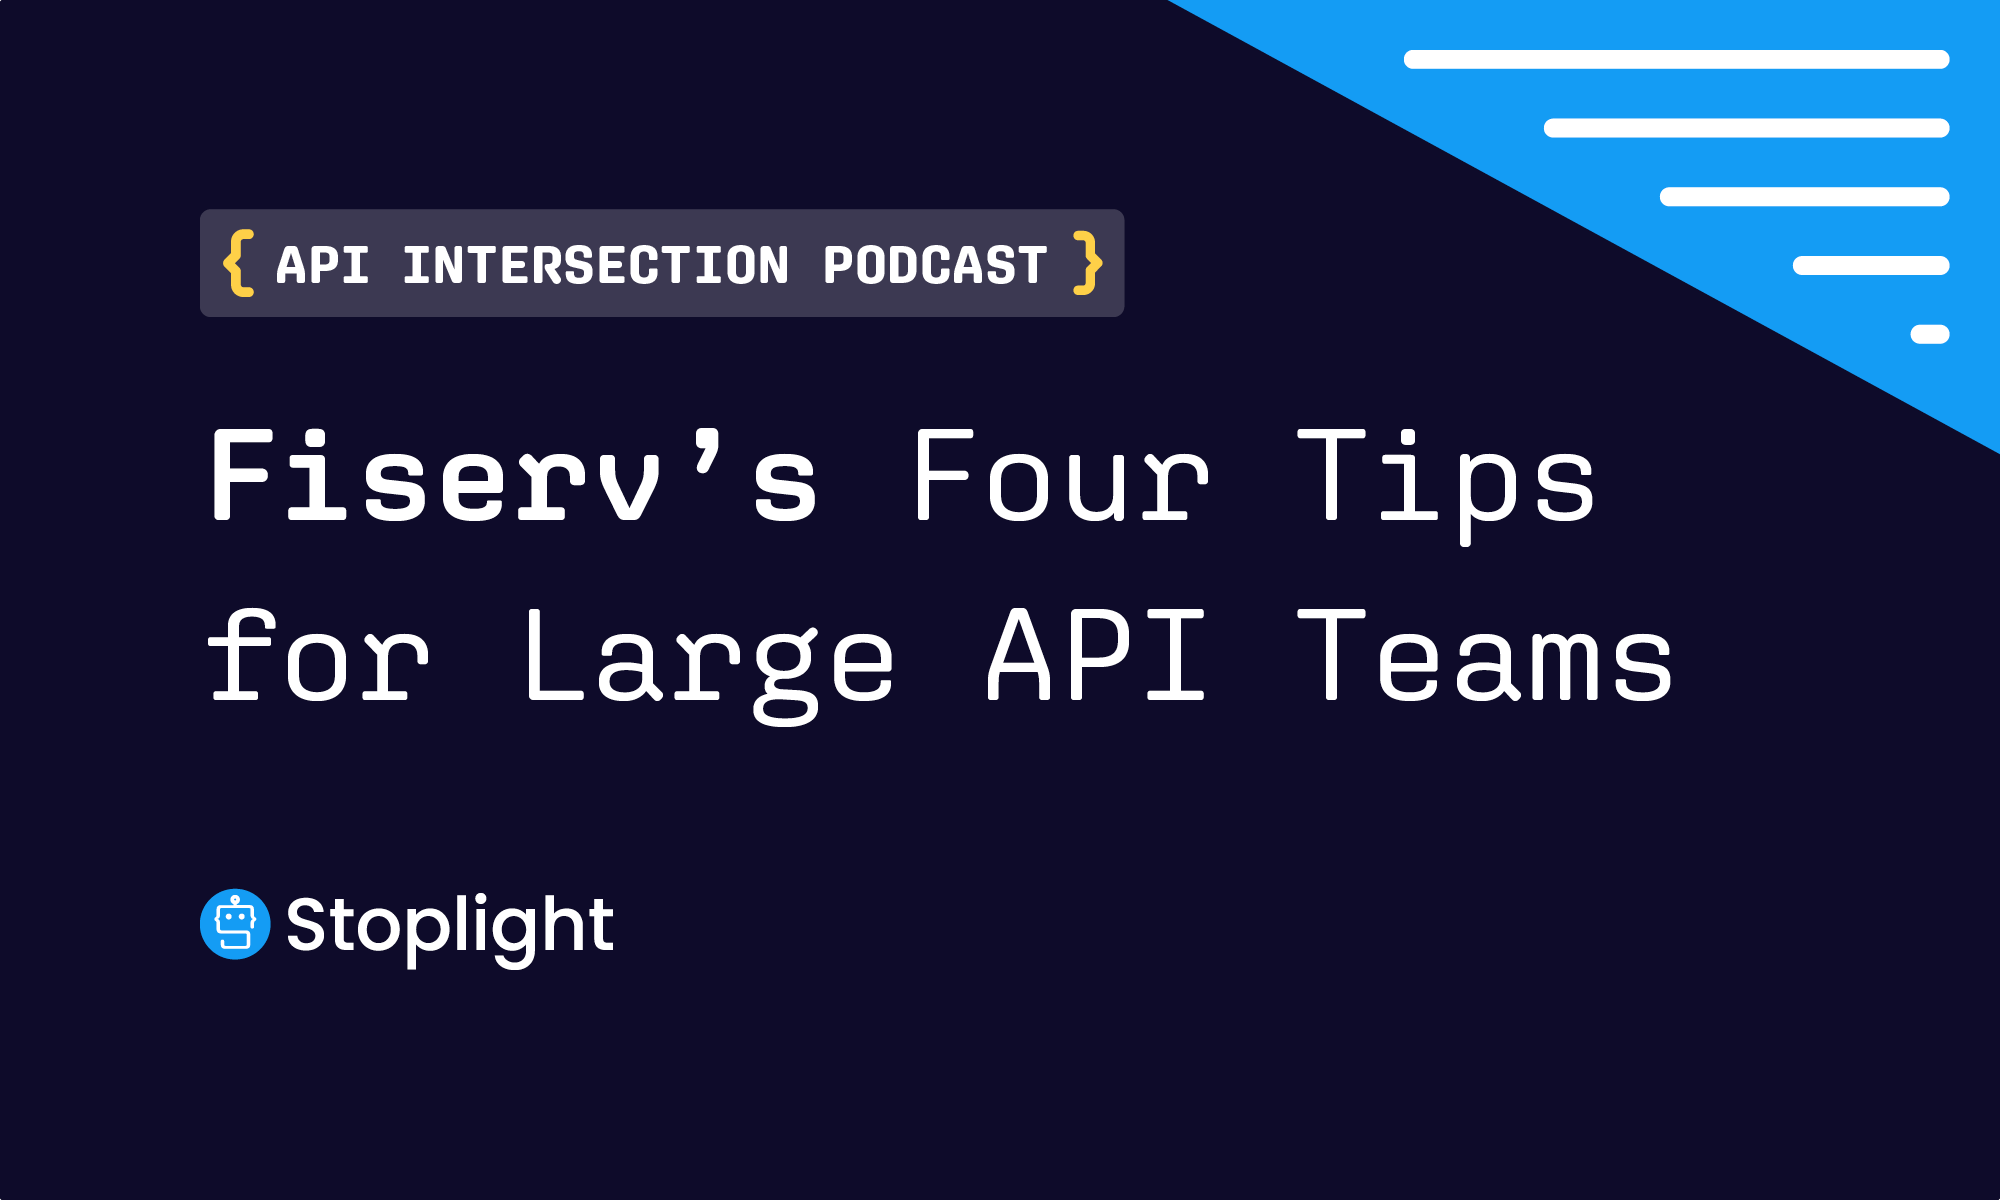 Fiserv’s Four Tips for Large API Teams